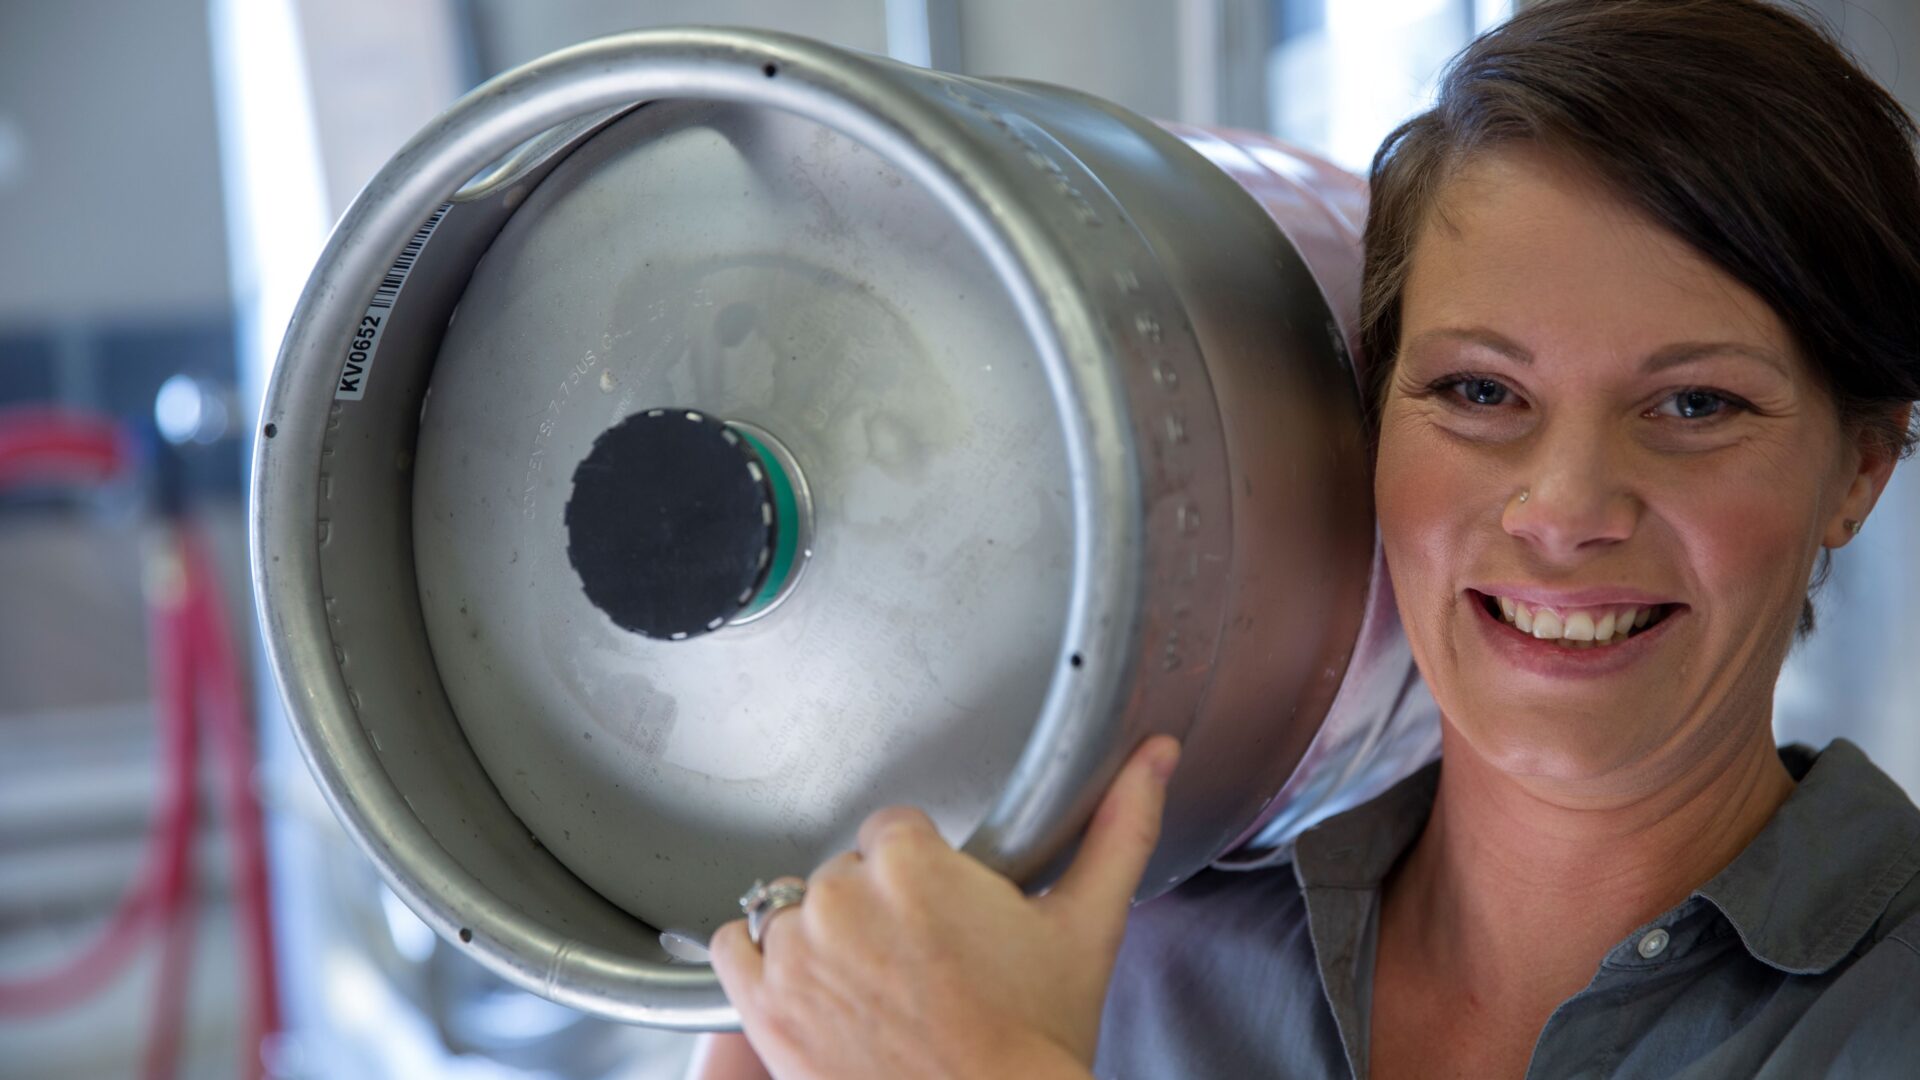 Craft brewery employee holding a beer canister